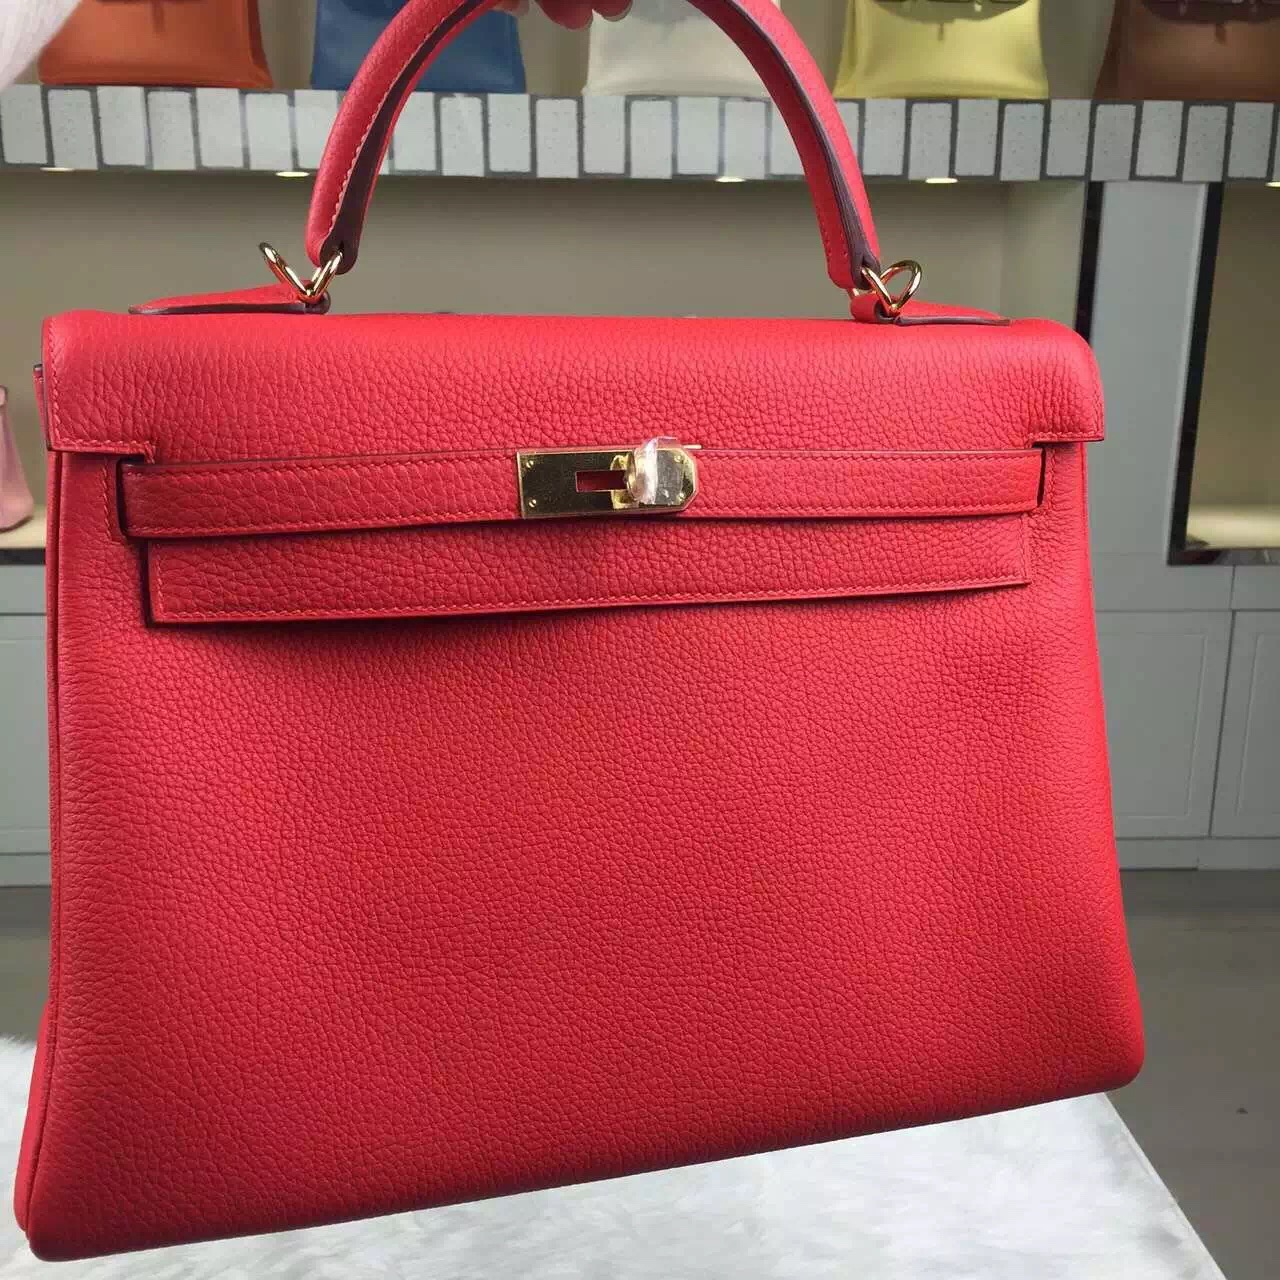 High Quality Hermes Kelly32 9T Flame Red Togo Leather Women&#8217;s Bag